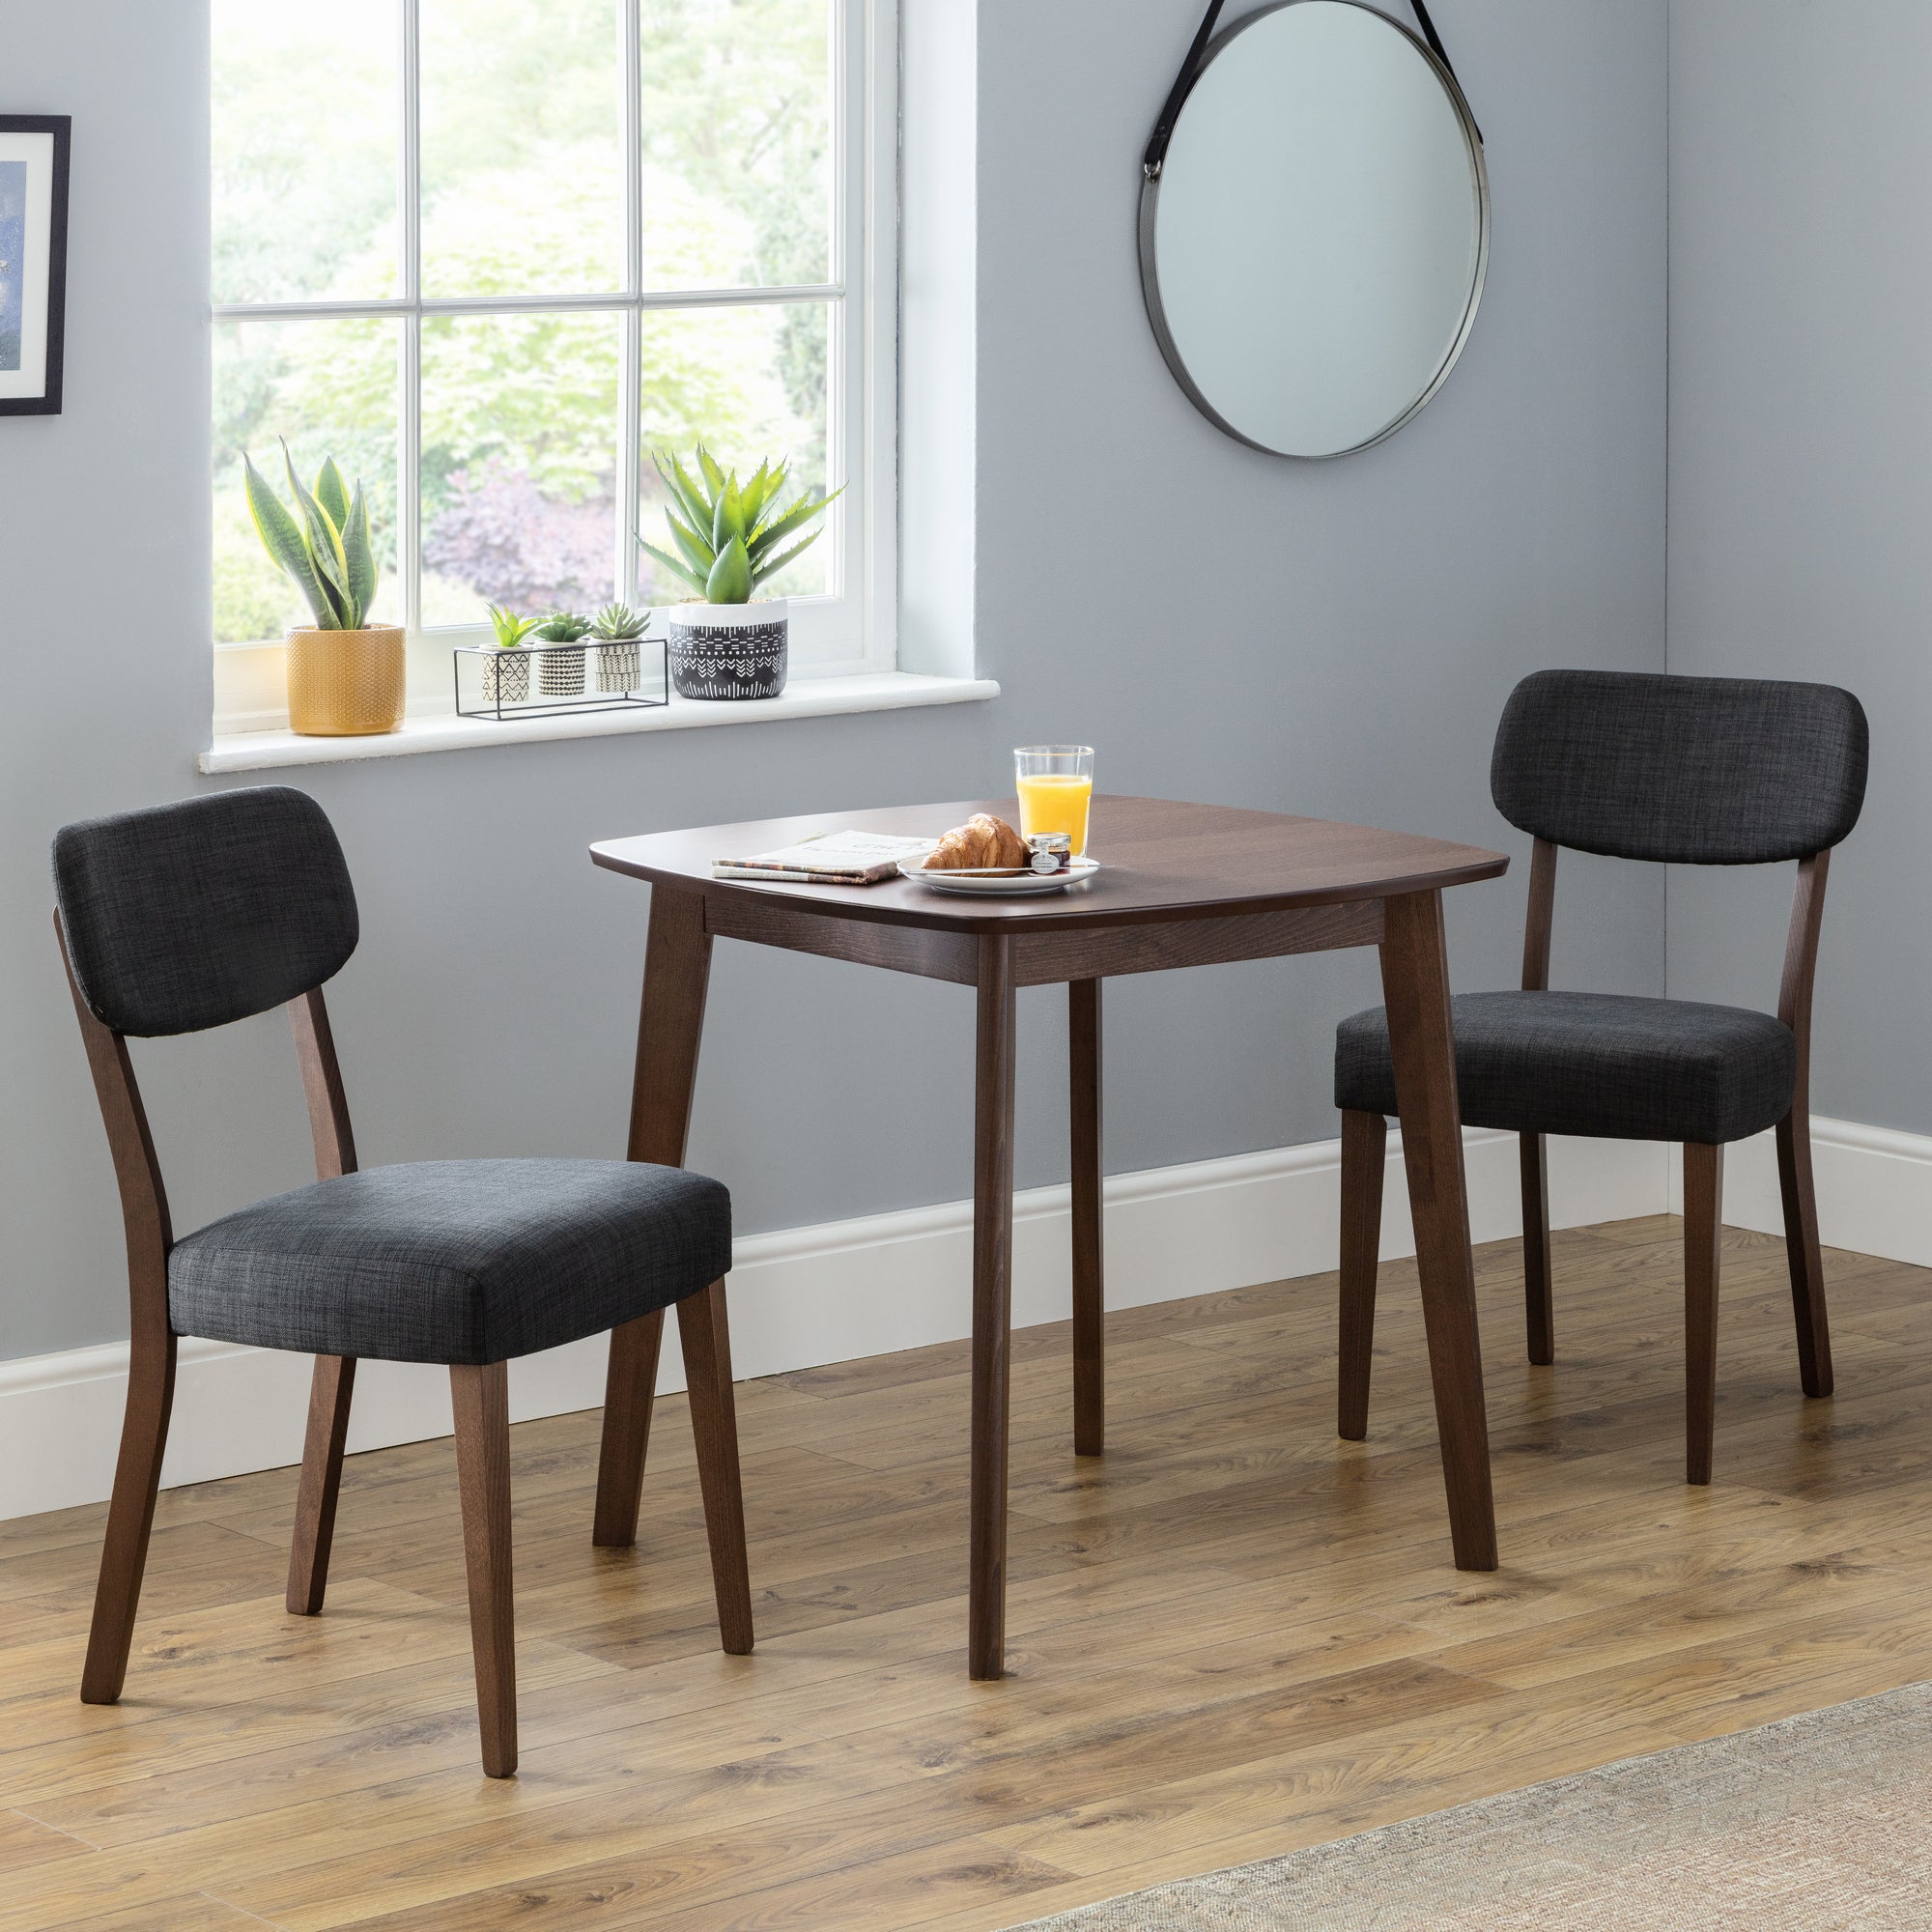 Lennox 4 Seater Square Dining Table, Brown Beech Wood Brown